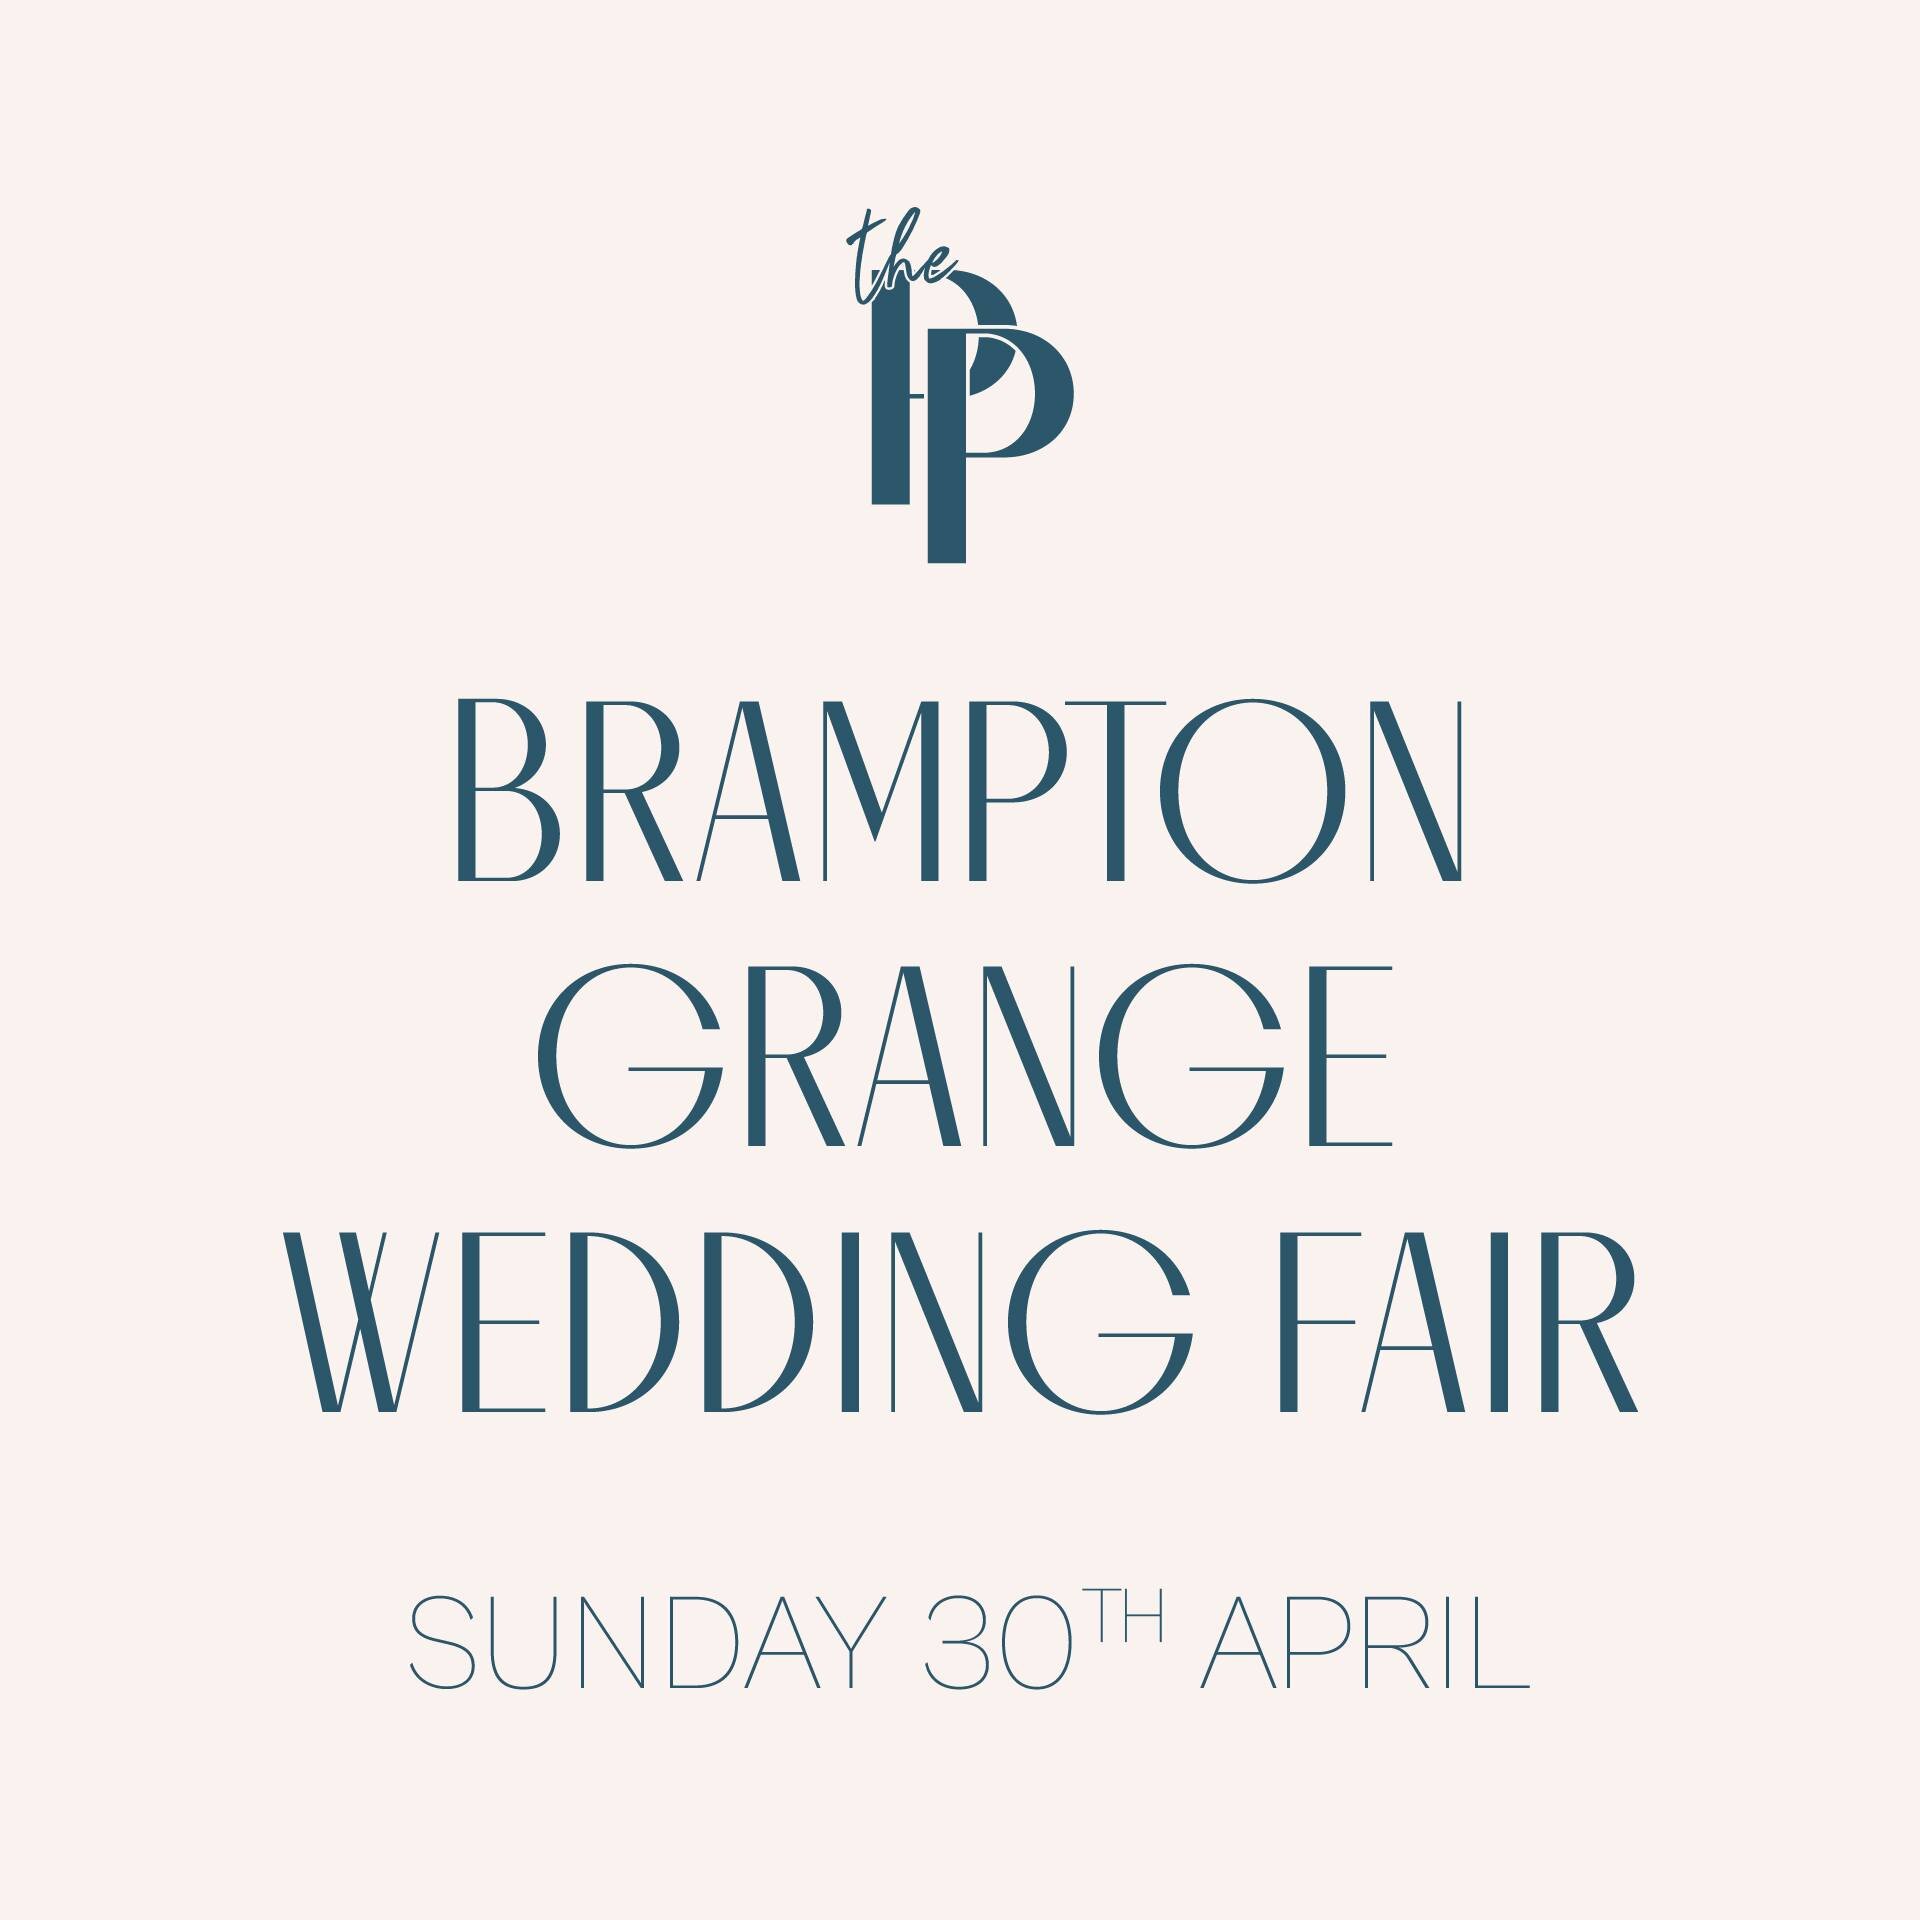 We're delighted to announce that we'll be making our first public appearance at @brampton_grange Wedding Fair, Saturday 30th April 2023 🎸

Our frontman Alex will be performing some acoustic covers, and members of the band will be there to meet and g